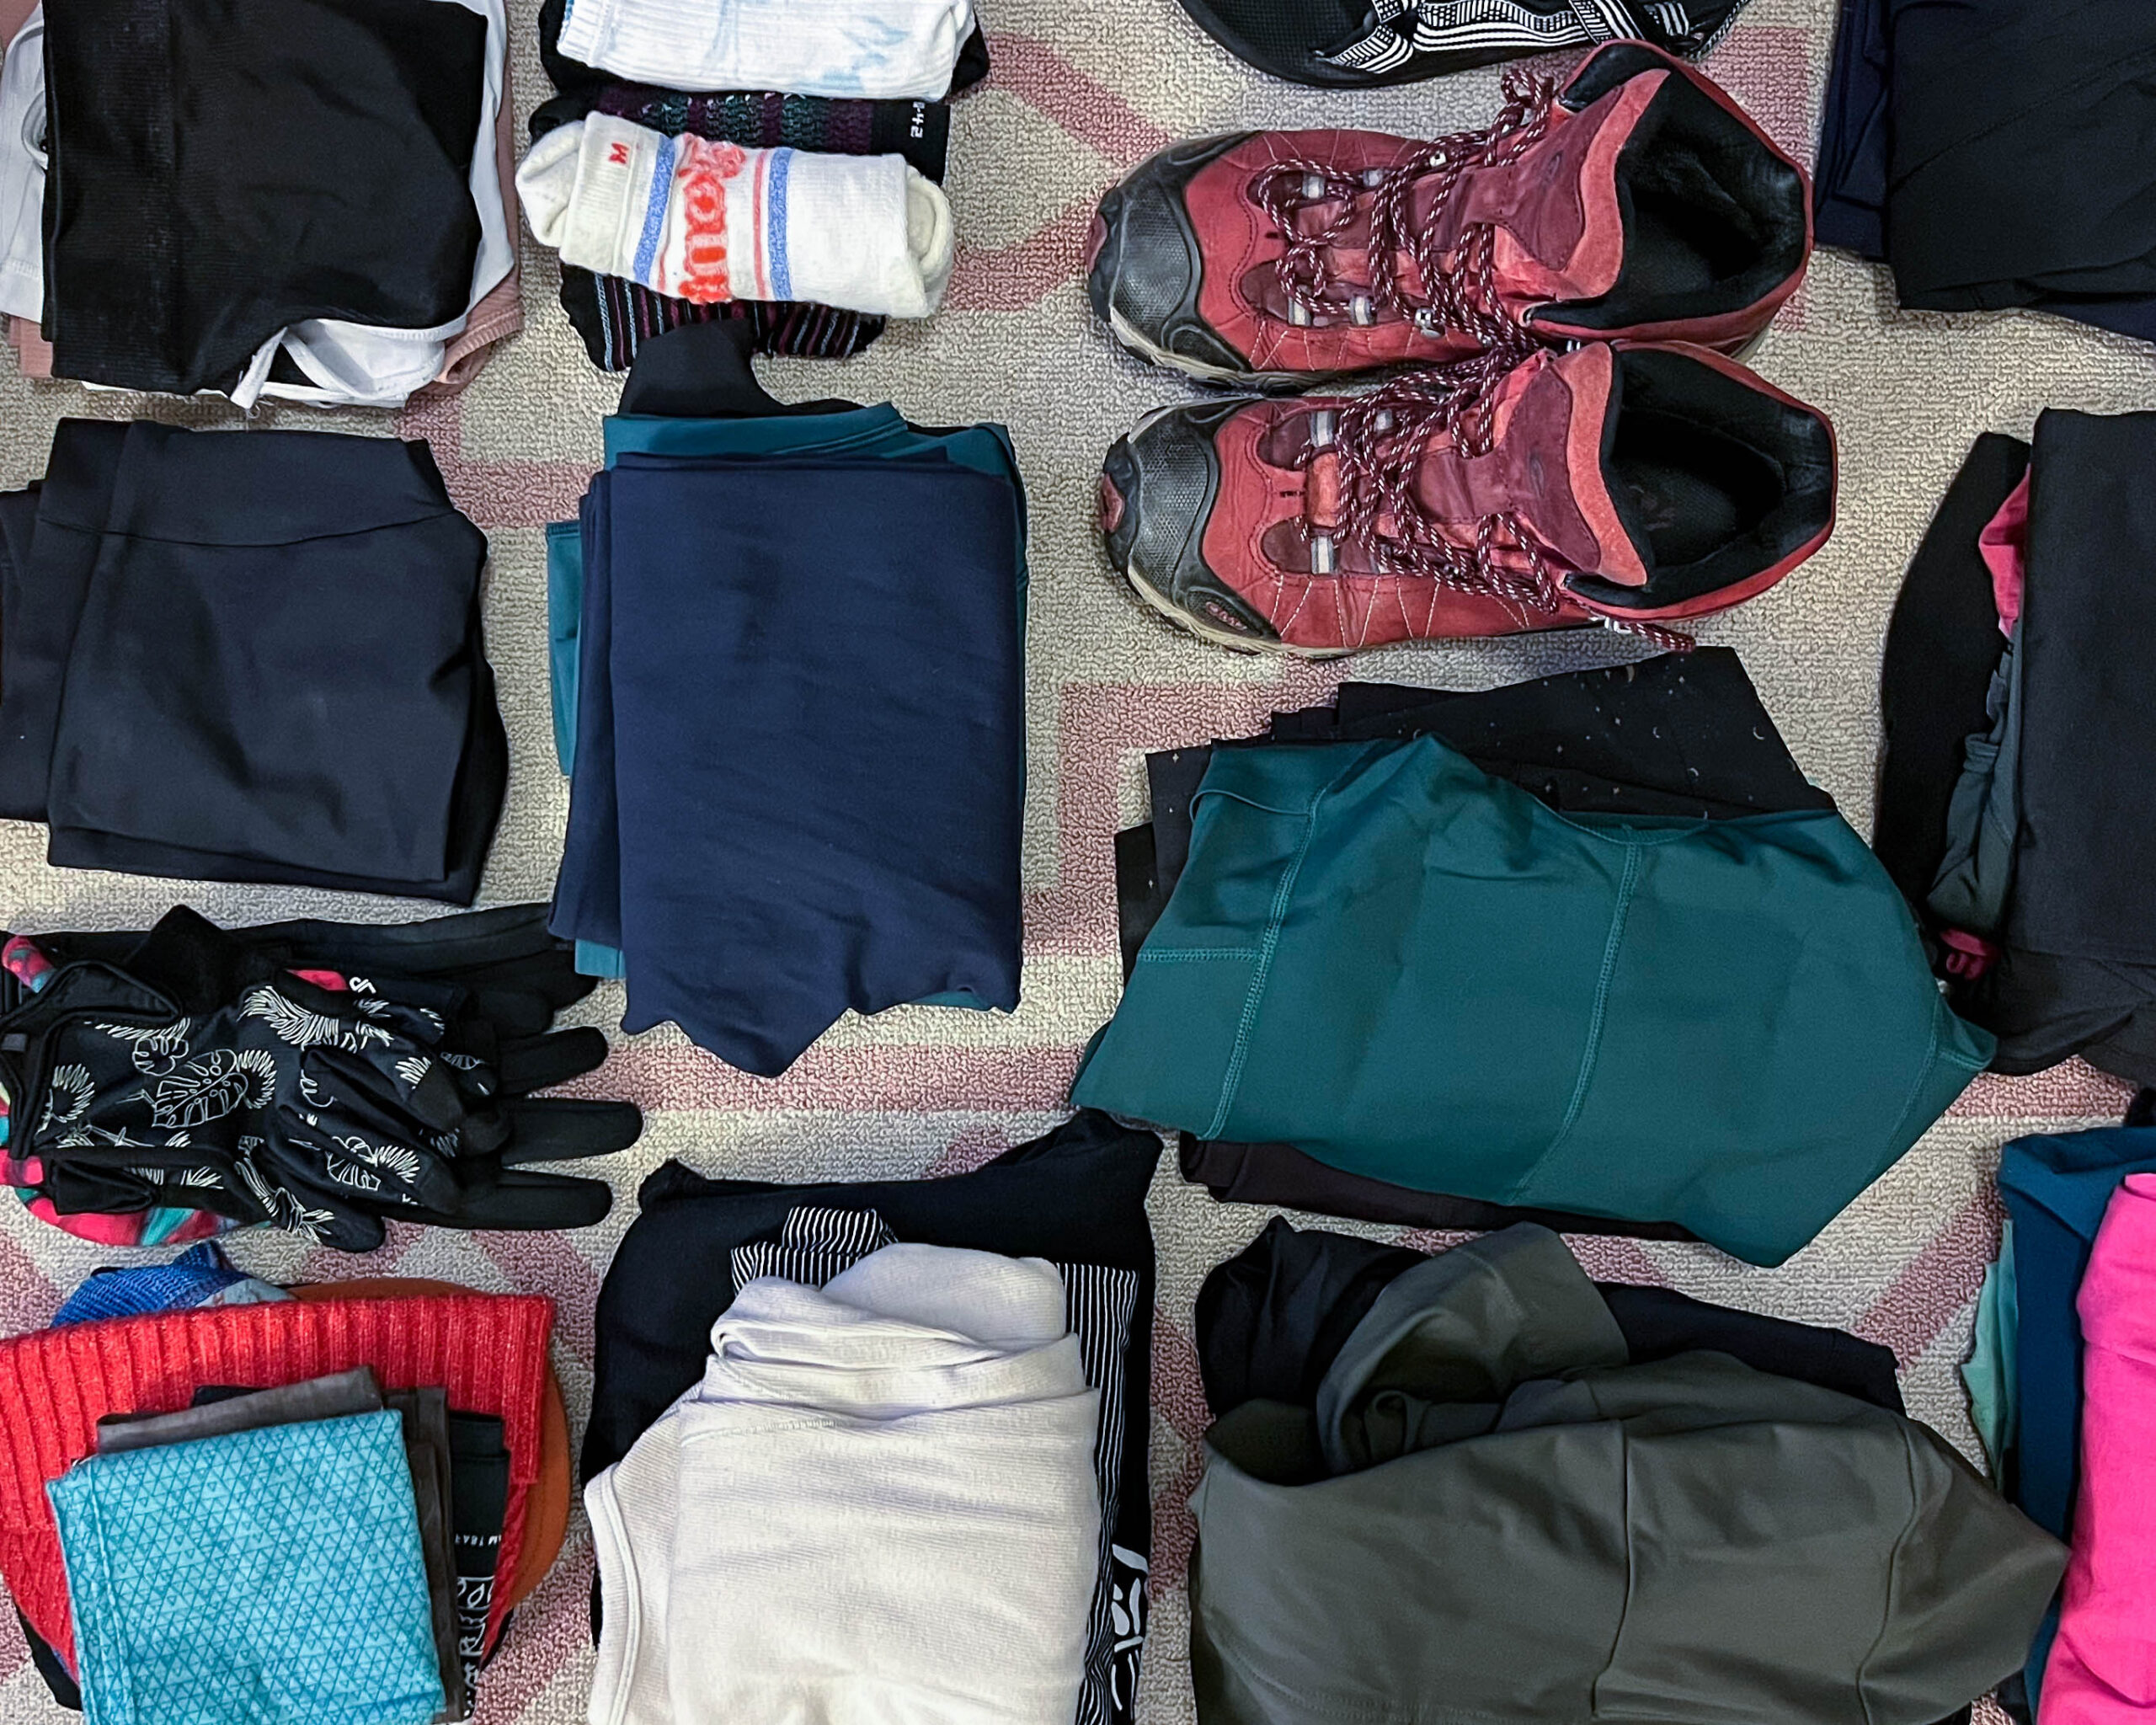 Clothes and shoes sitting on the floor are organized into piles for efficient packing.